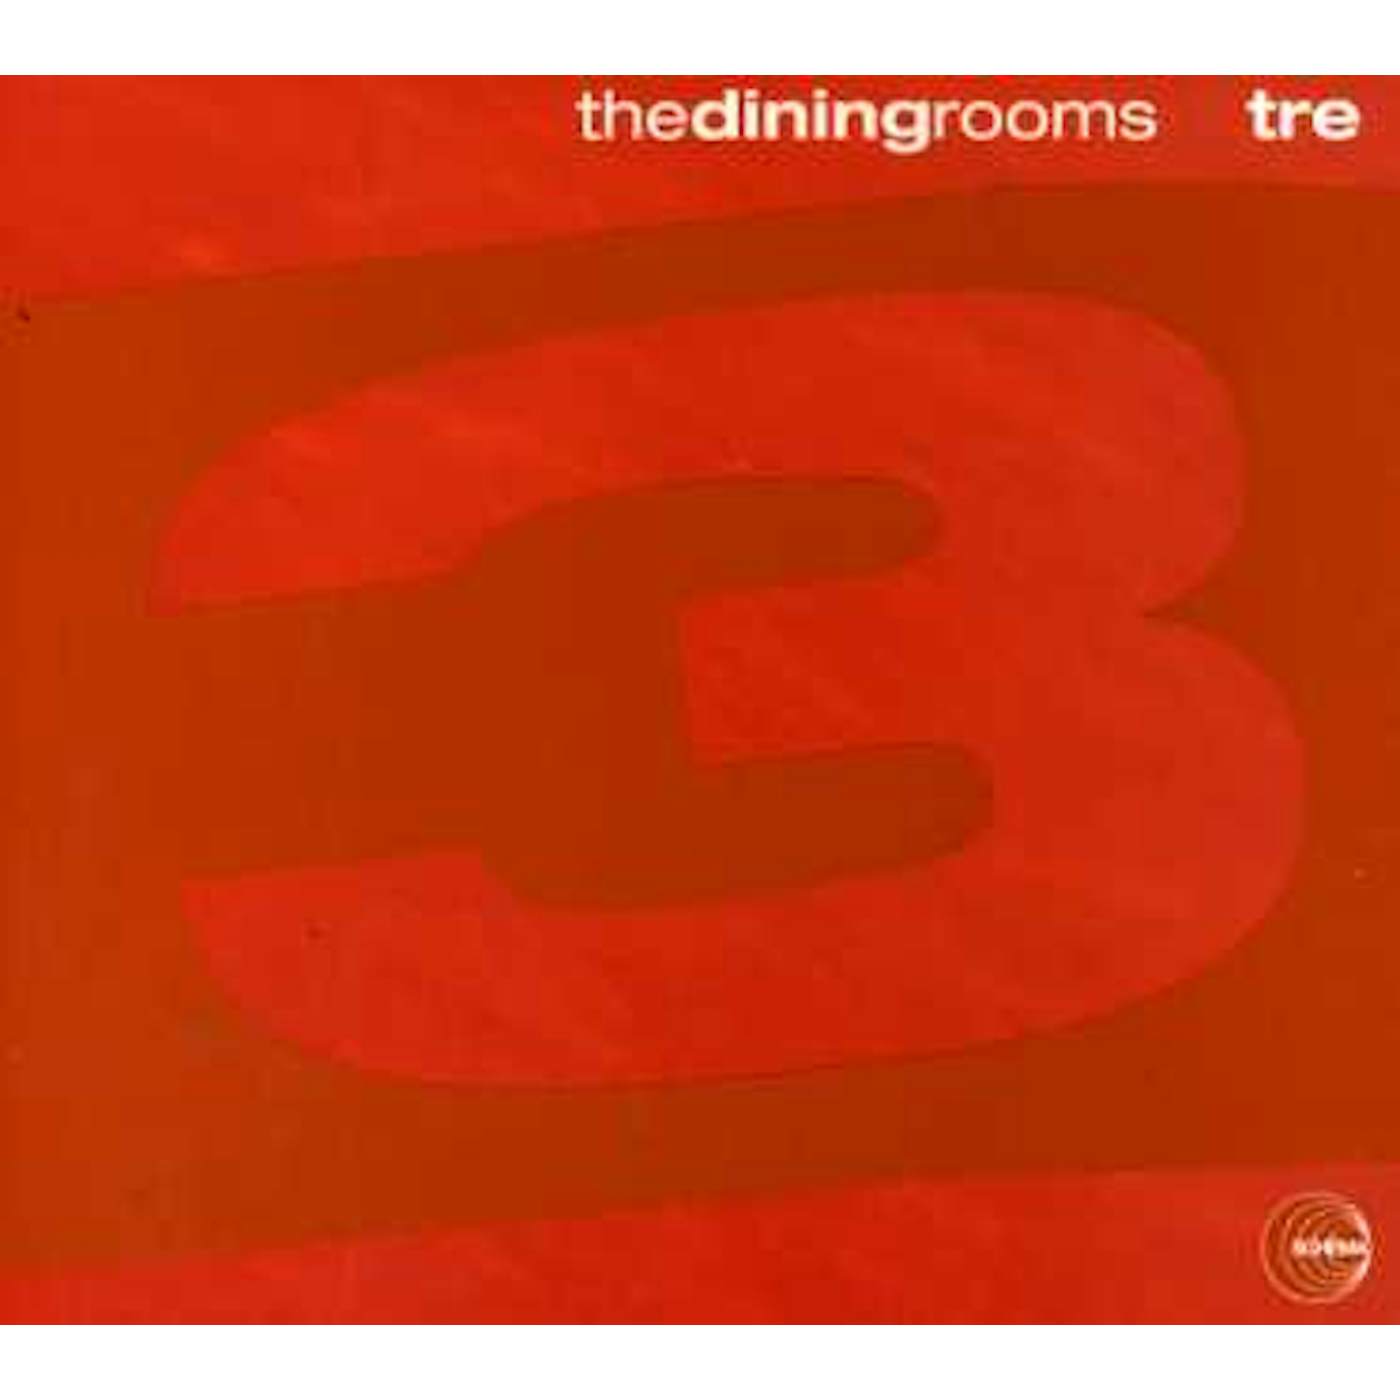 The Dining Rooms TRE CD